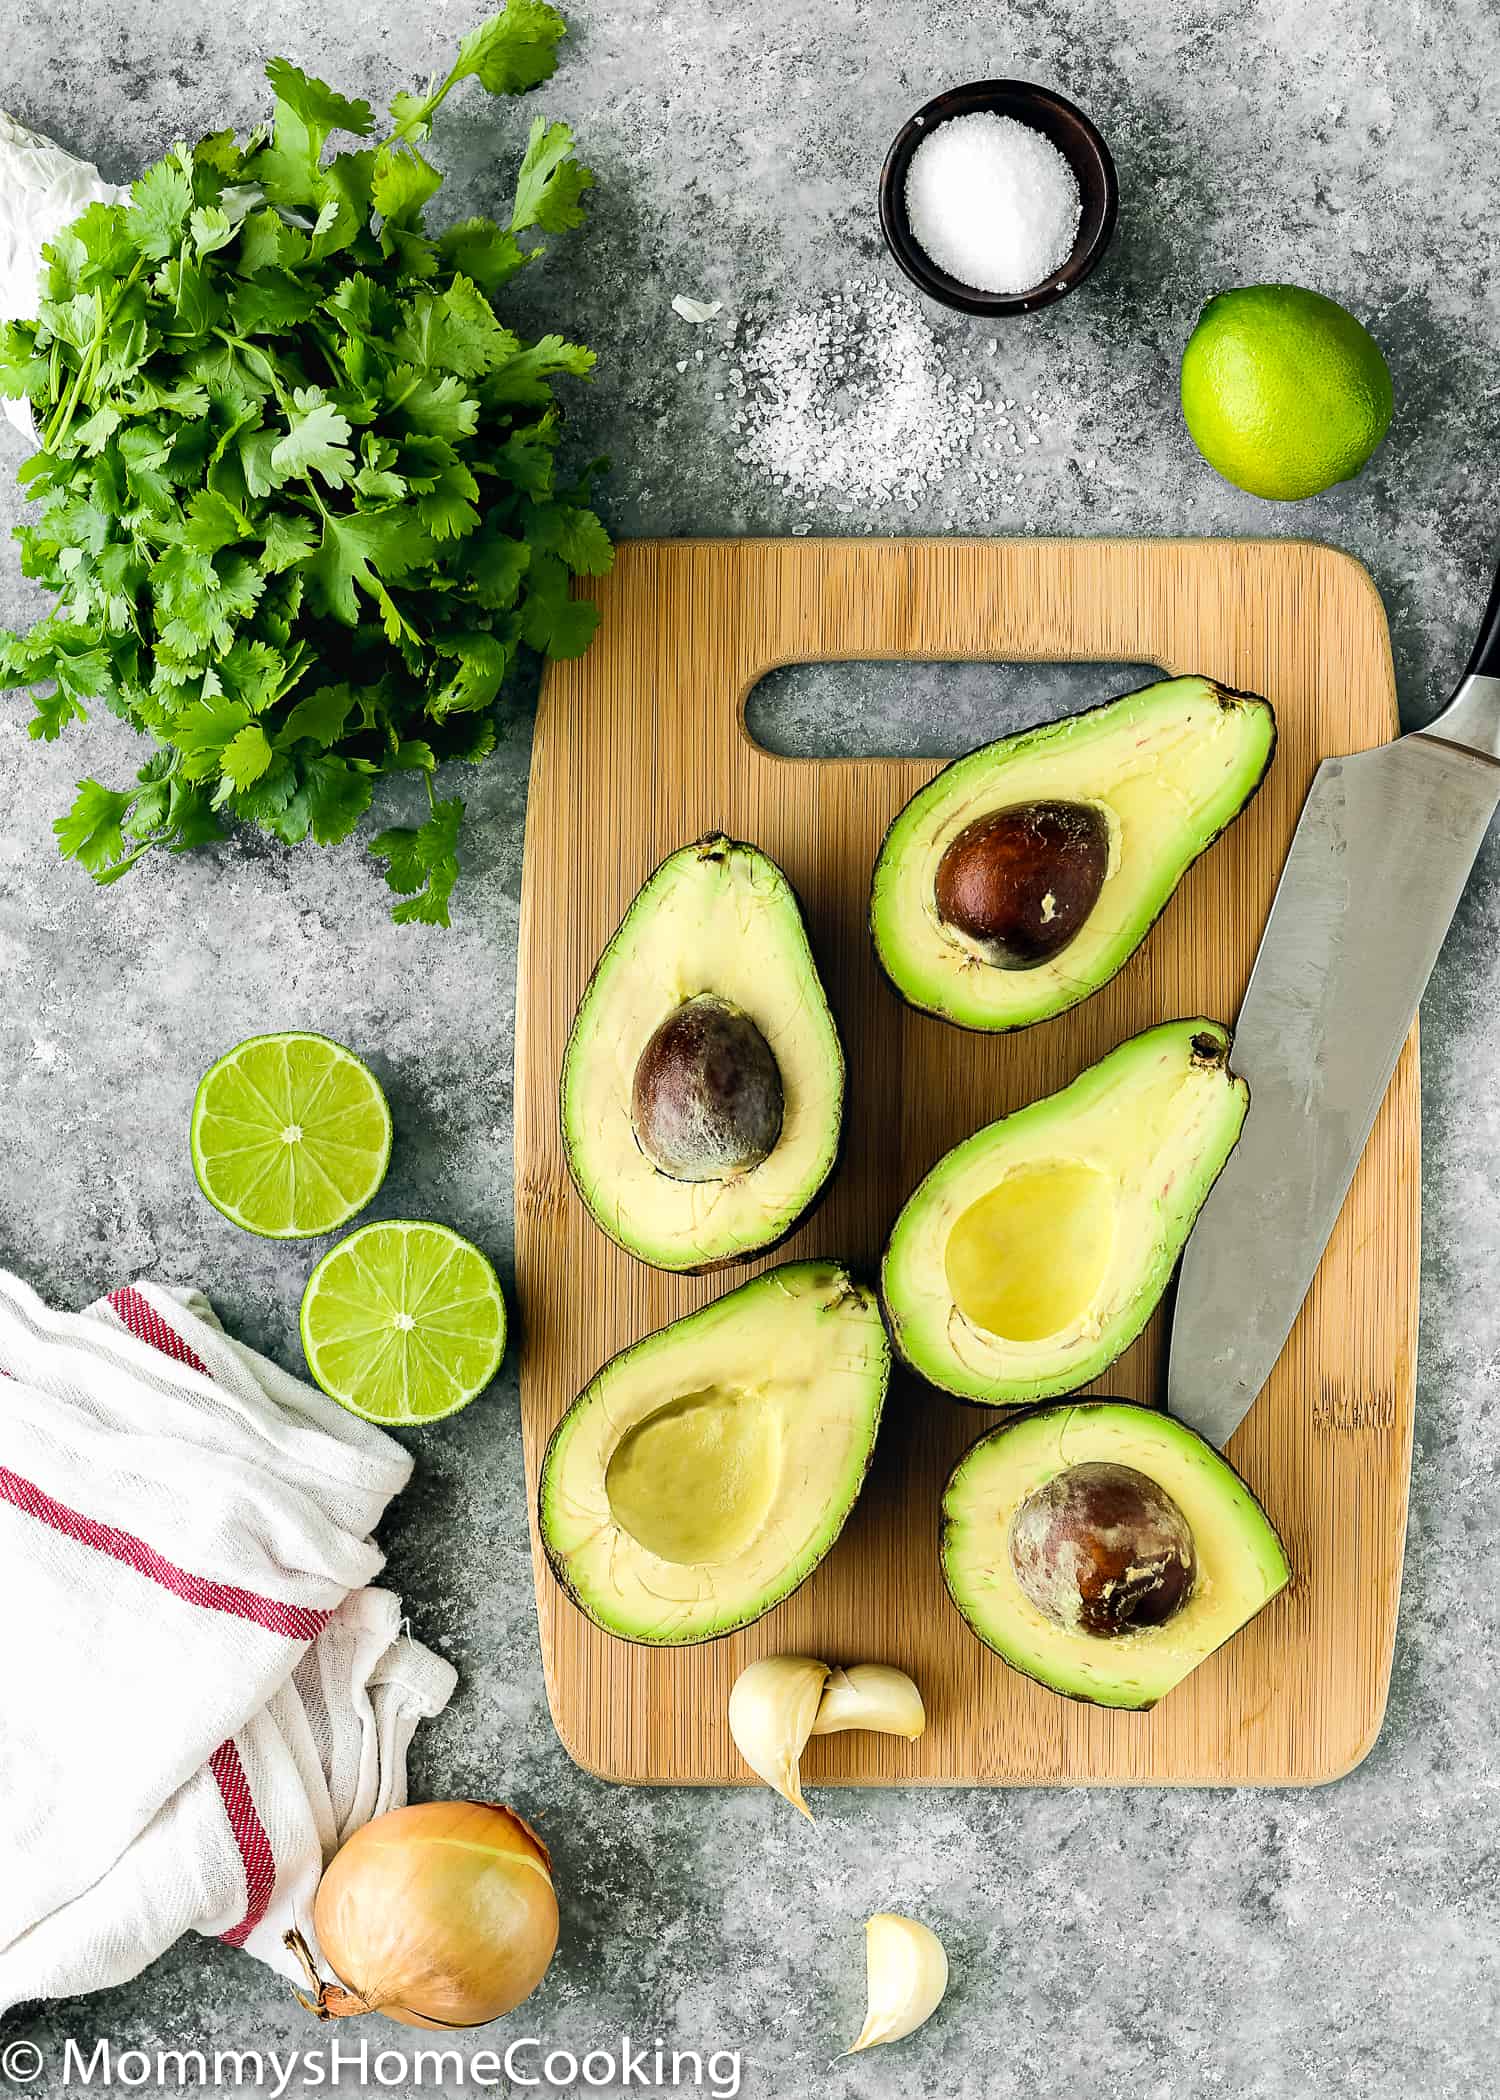 cut avocados on a cutting board and knife, onion, limes and cilantro.